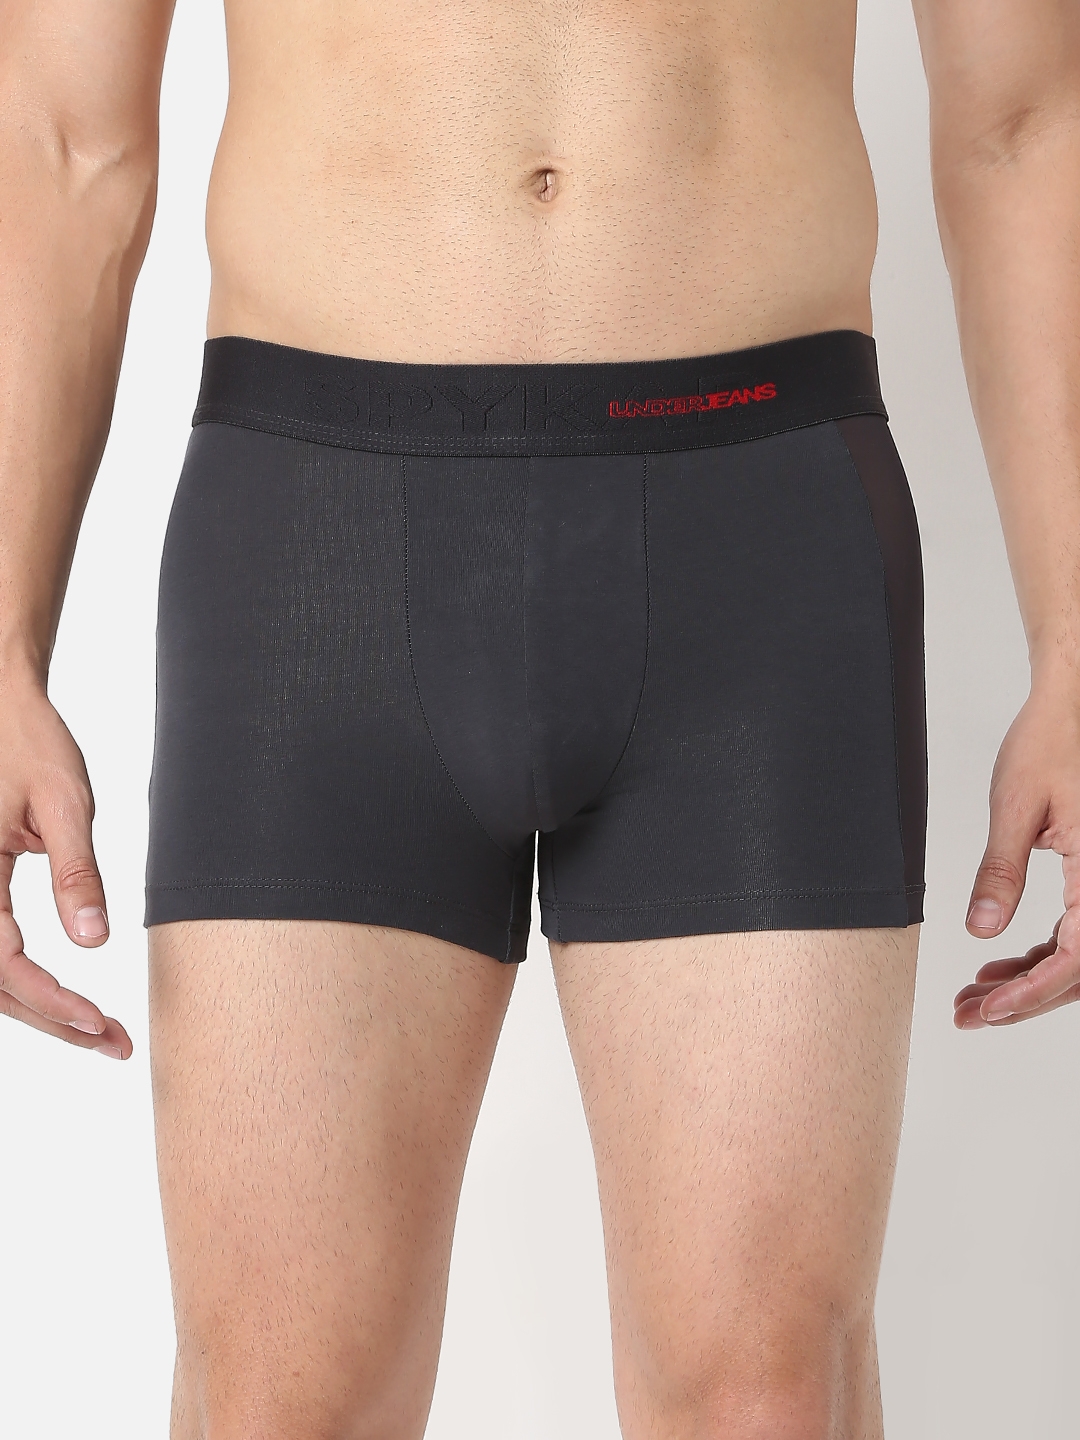 Spykar | Underjeans by Spykar Red Cotton Trunk For Mens